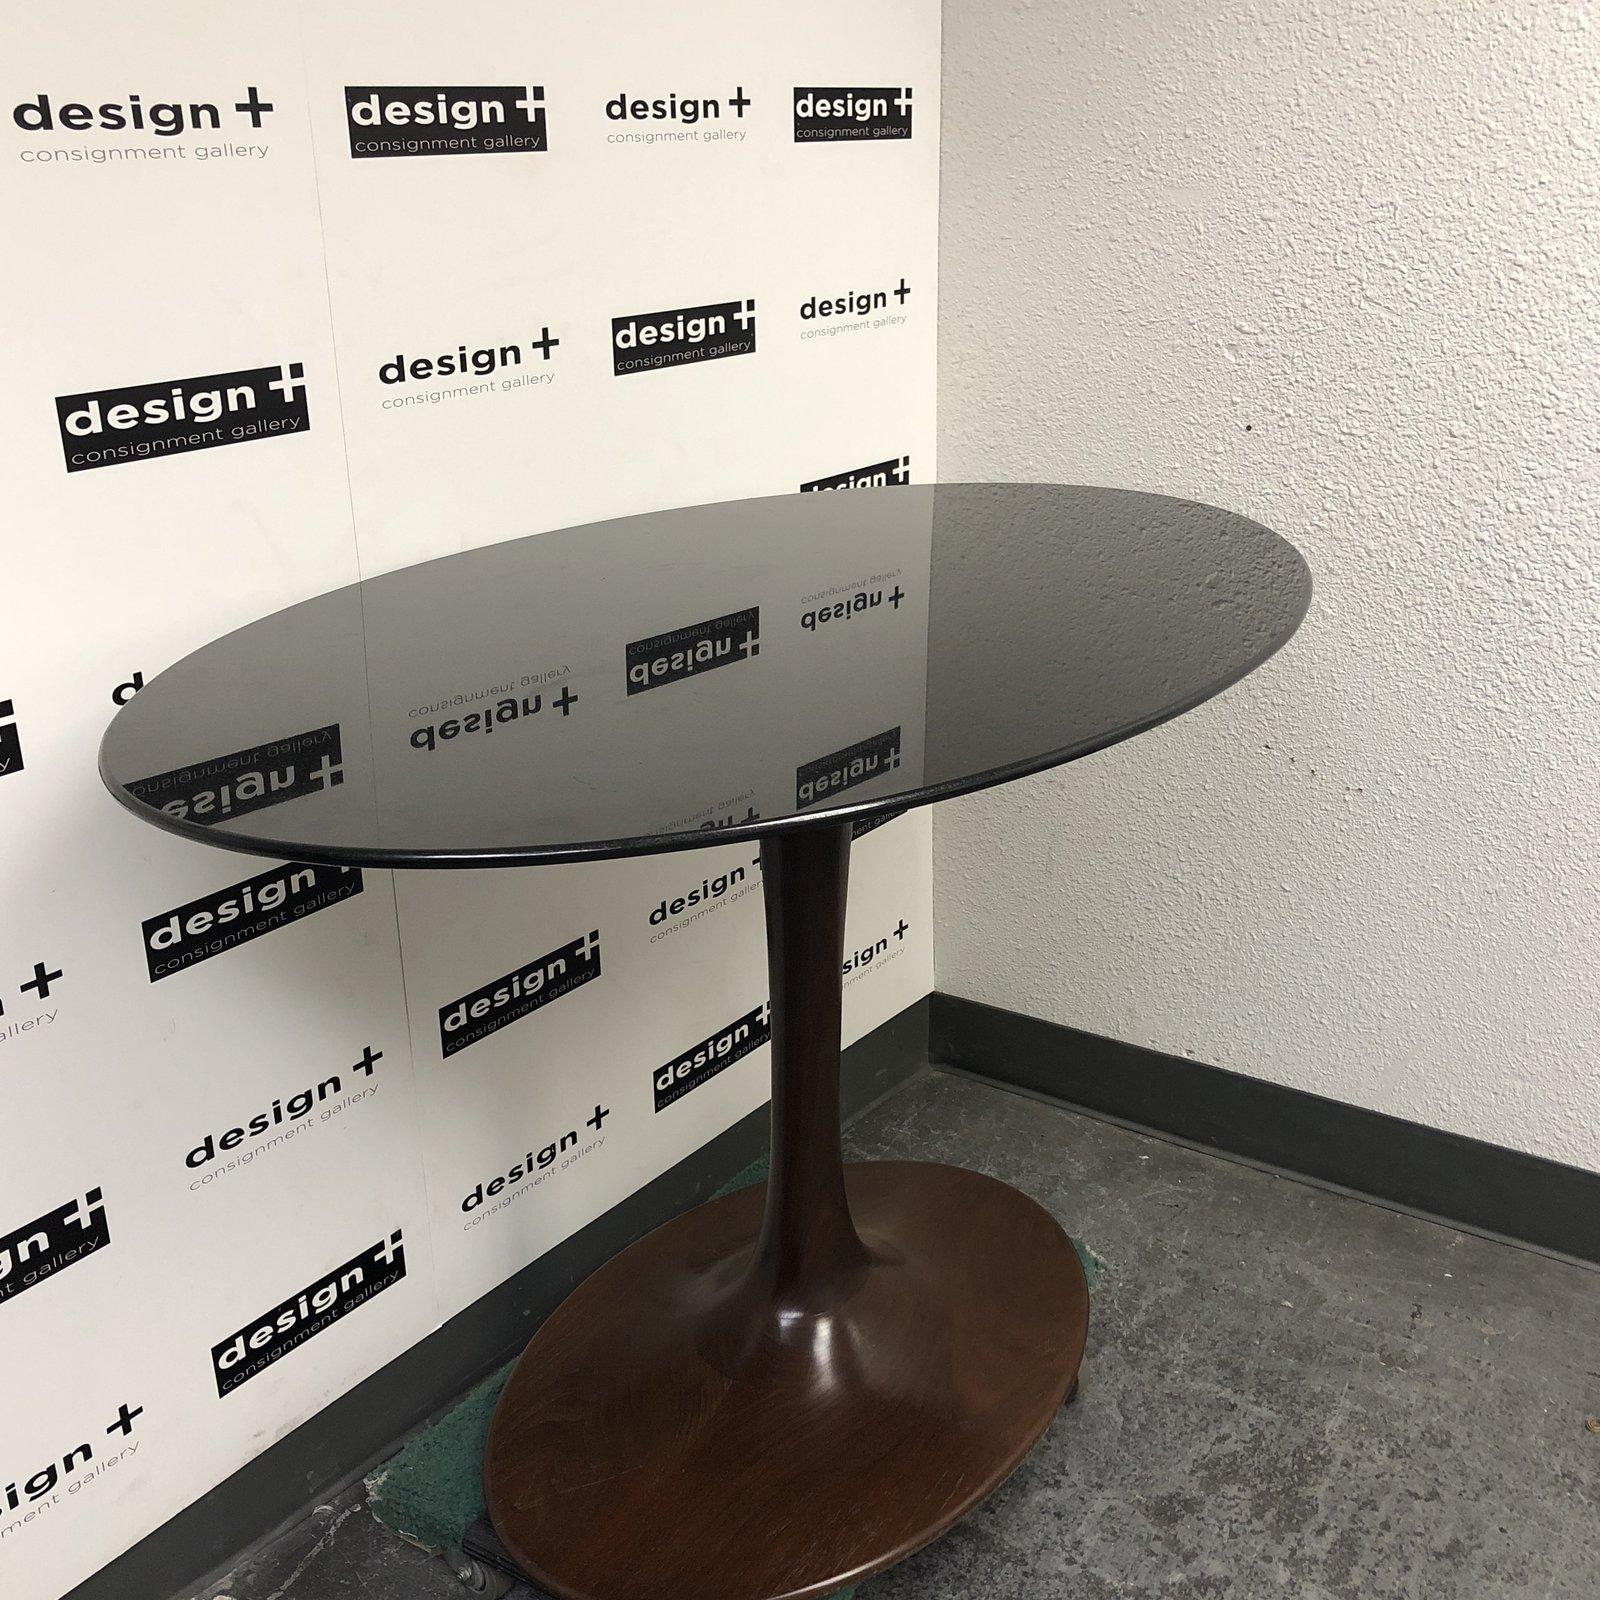 A custom midcentury style counter height table. Inspired by Iconic American designer Eero Saarinen Tulip table. The sleek curved base is wood in a dark walnut finish with minor wear. Accompanied with a oval polished edge black sapphire granite top.